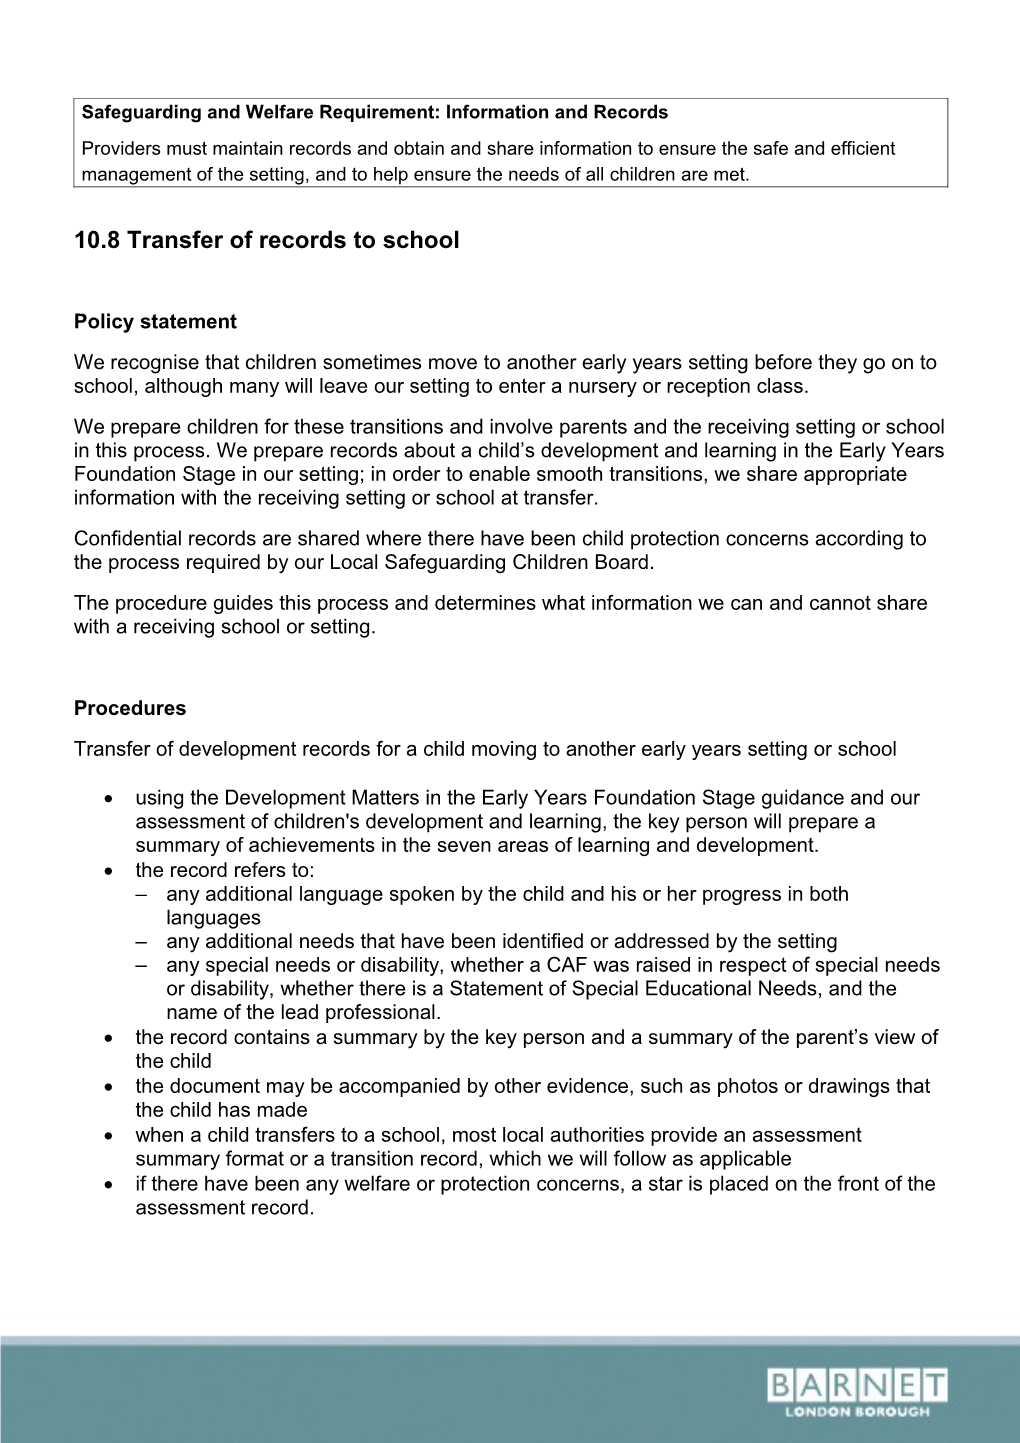 Safeguarding and Welfare Requirement: Information and Records10.8 Transfer of Records to School